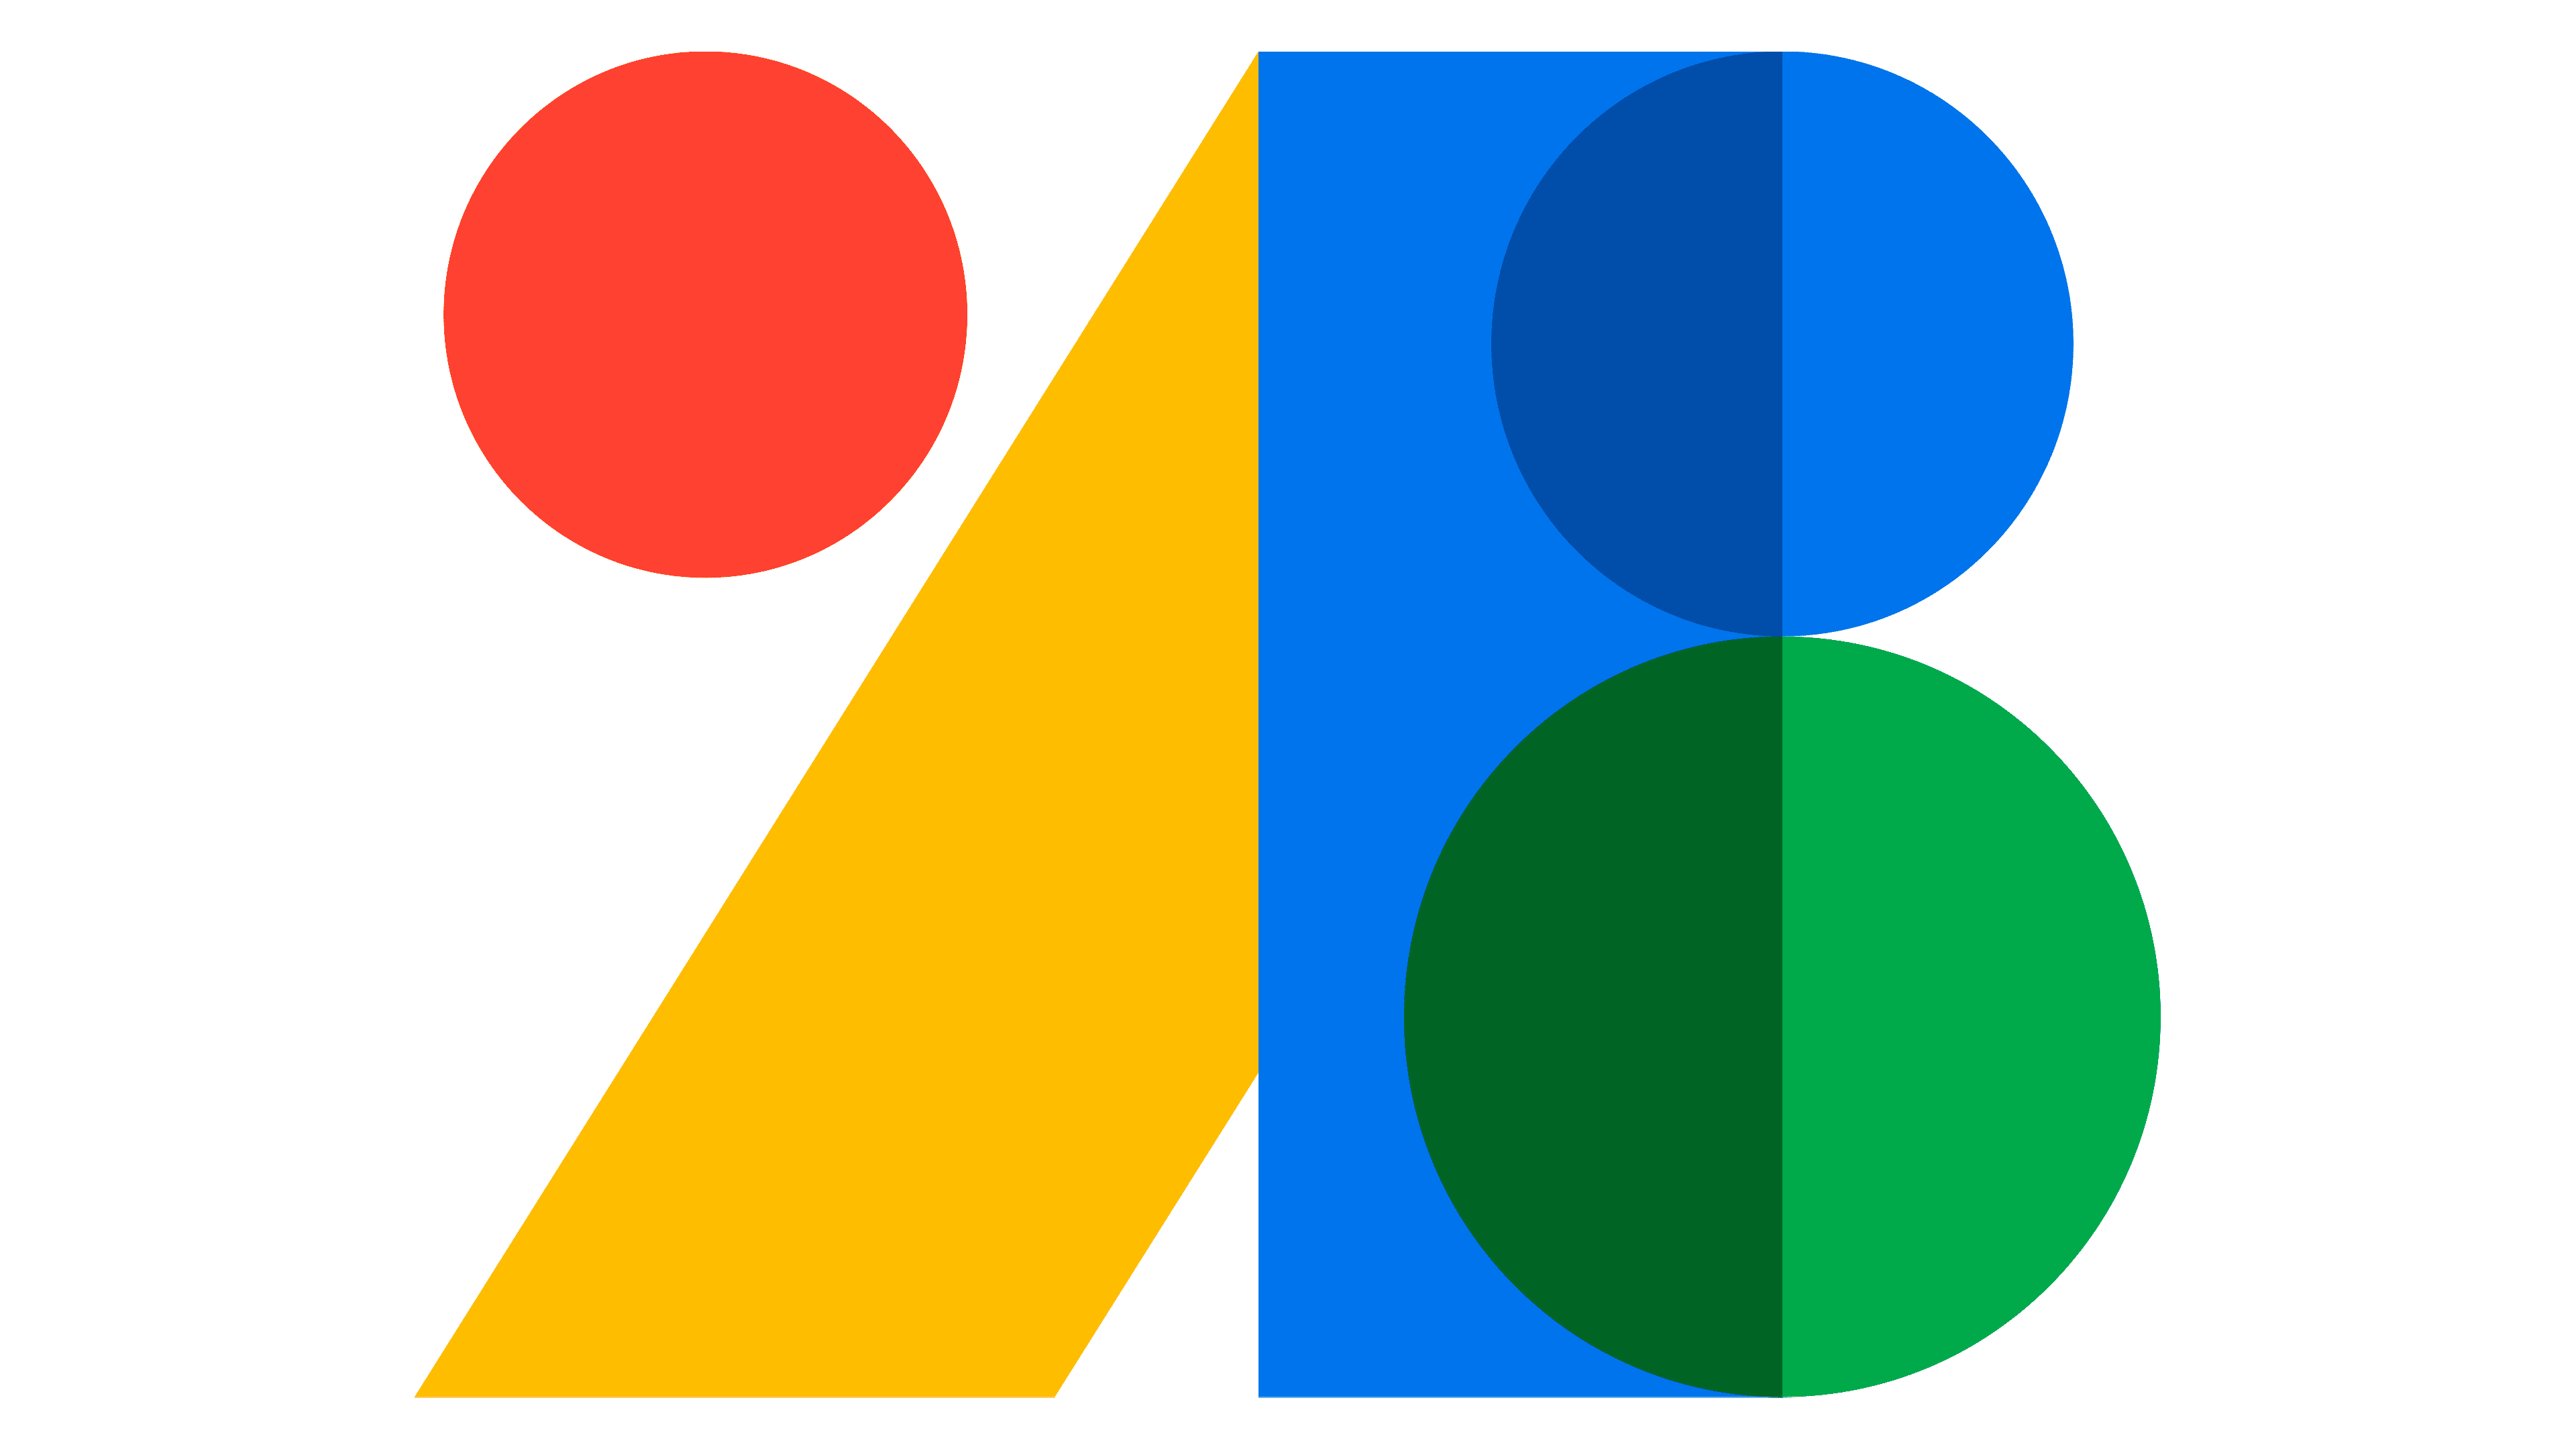 New Google Fonts logo - using base colors and new elements